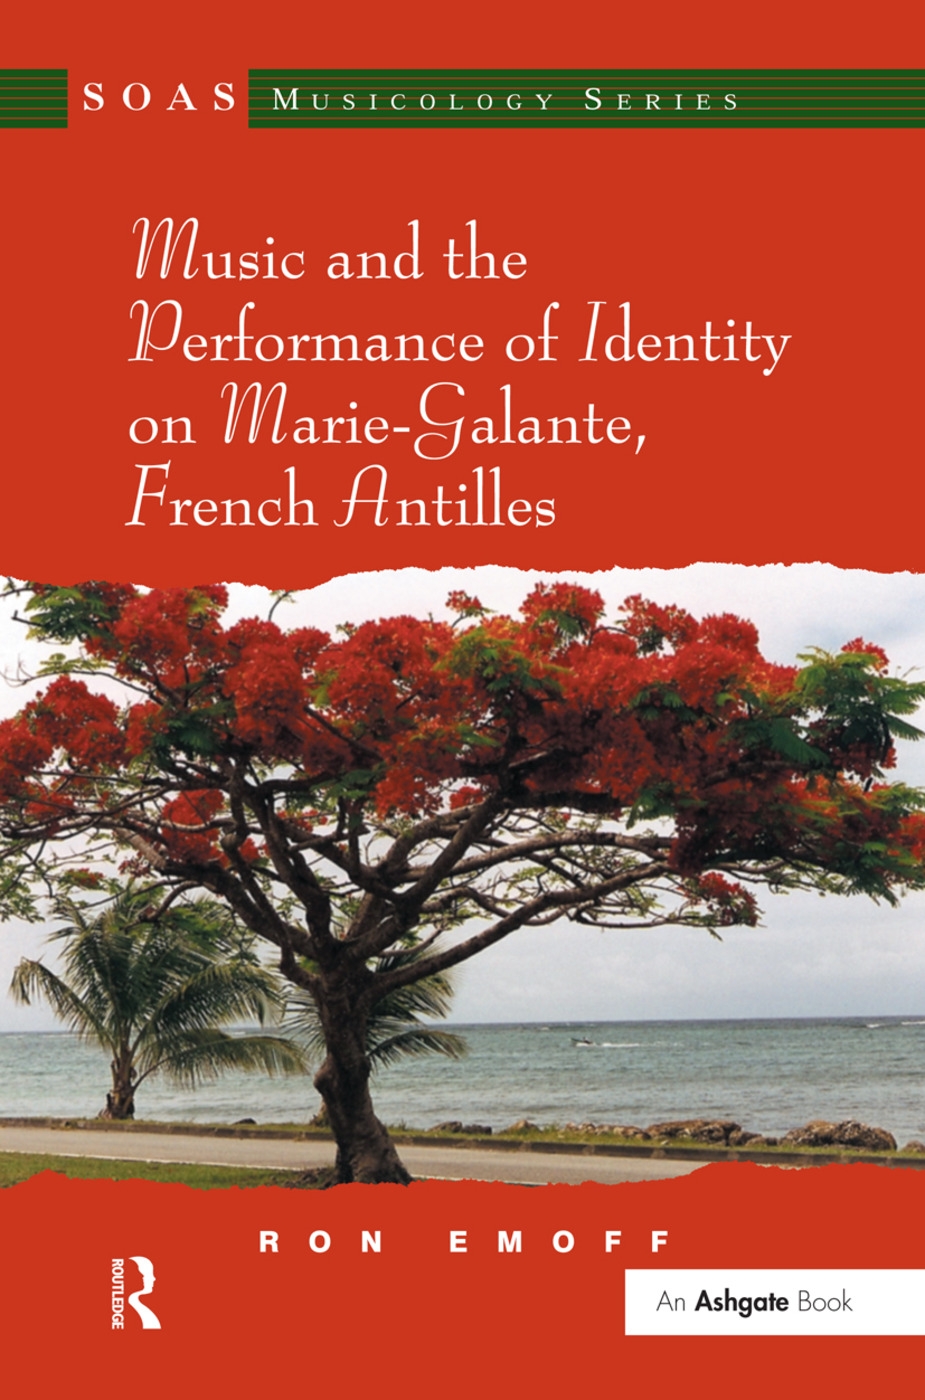 Music and the Performance of Identity on Marie-Galante, French Antilles. Ron Emoff